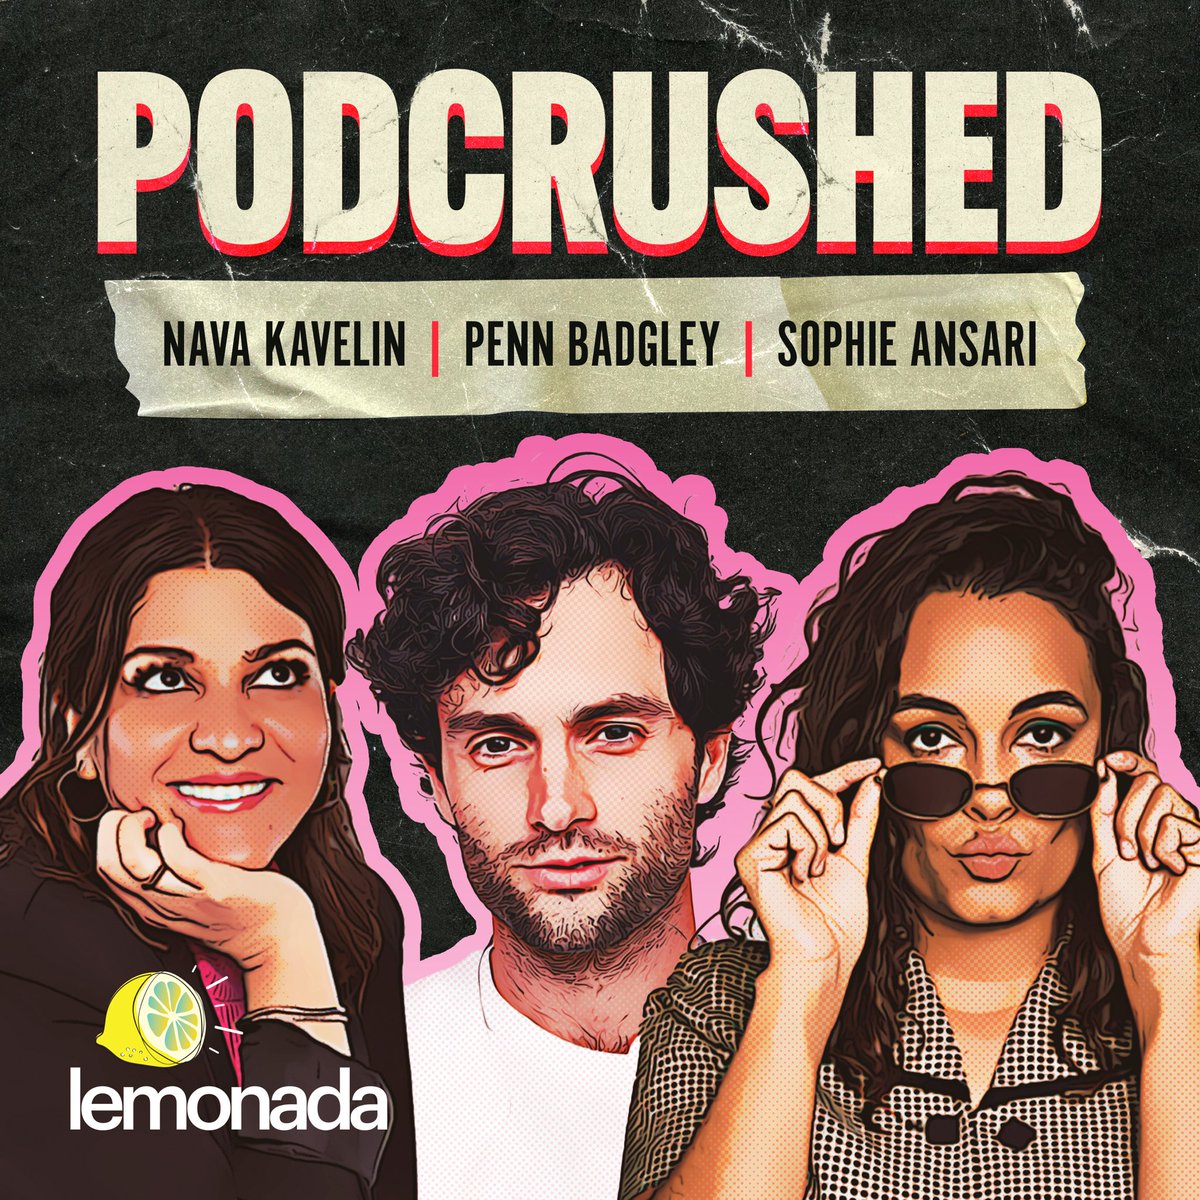 Welcome to the Lemonada Media Family, Podcrushed! “Podcrushed,” hosted by Penn Badgley , Nava Kavelin, and Sophie Ansari, explores the heartbreak, anxiety, and self-discovery of being a teenager. The hosts bring listeners heartfelt and hilarious stories and conversations about…